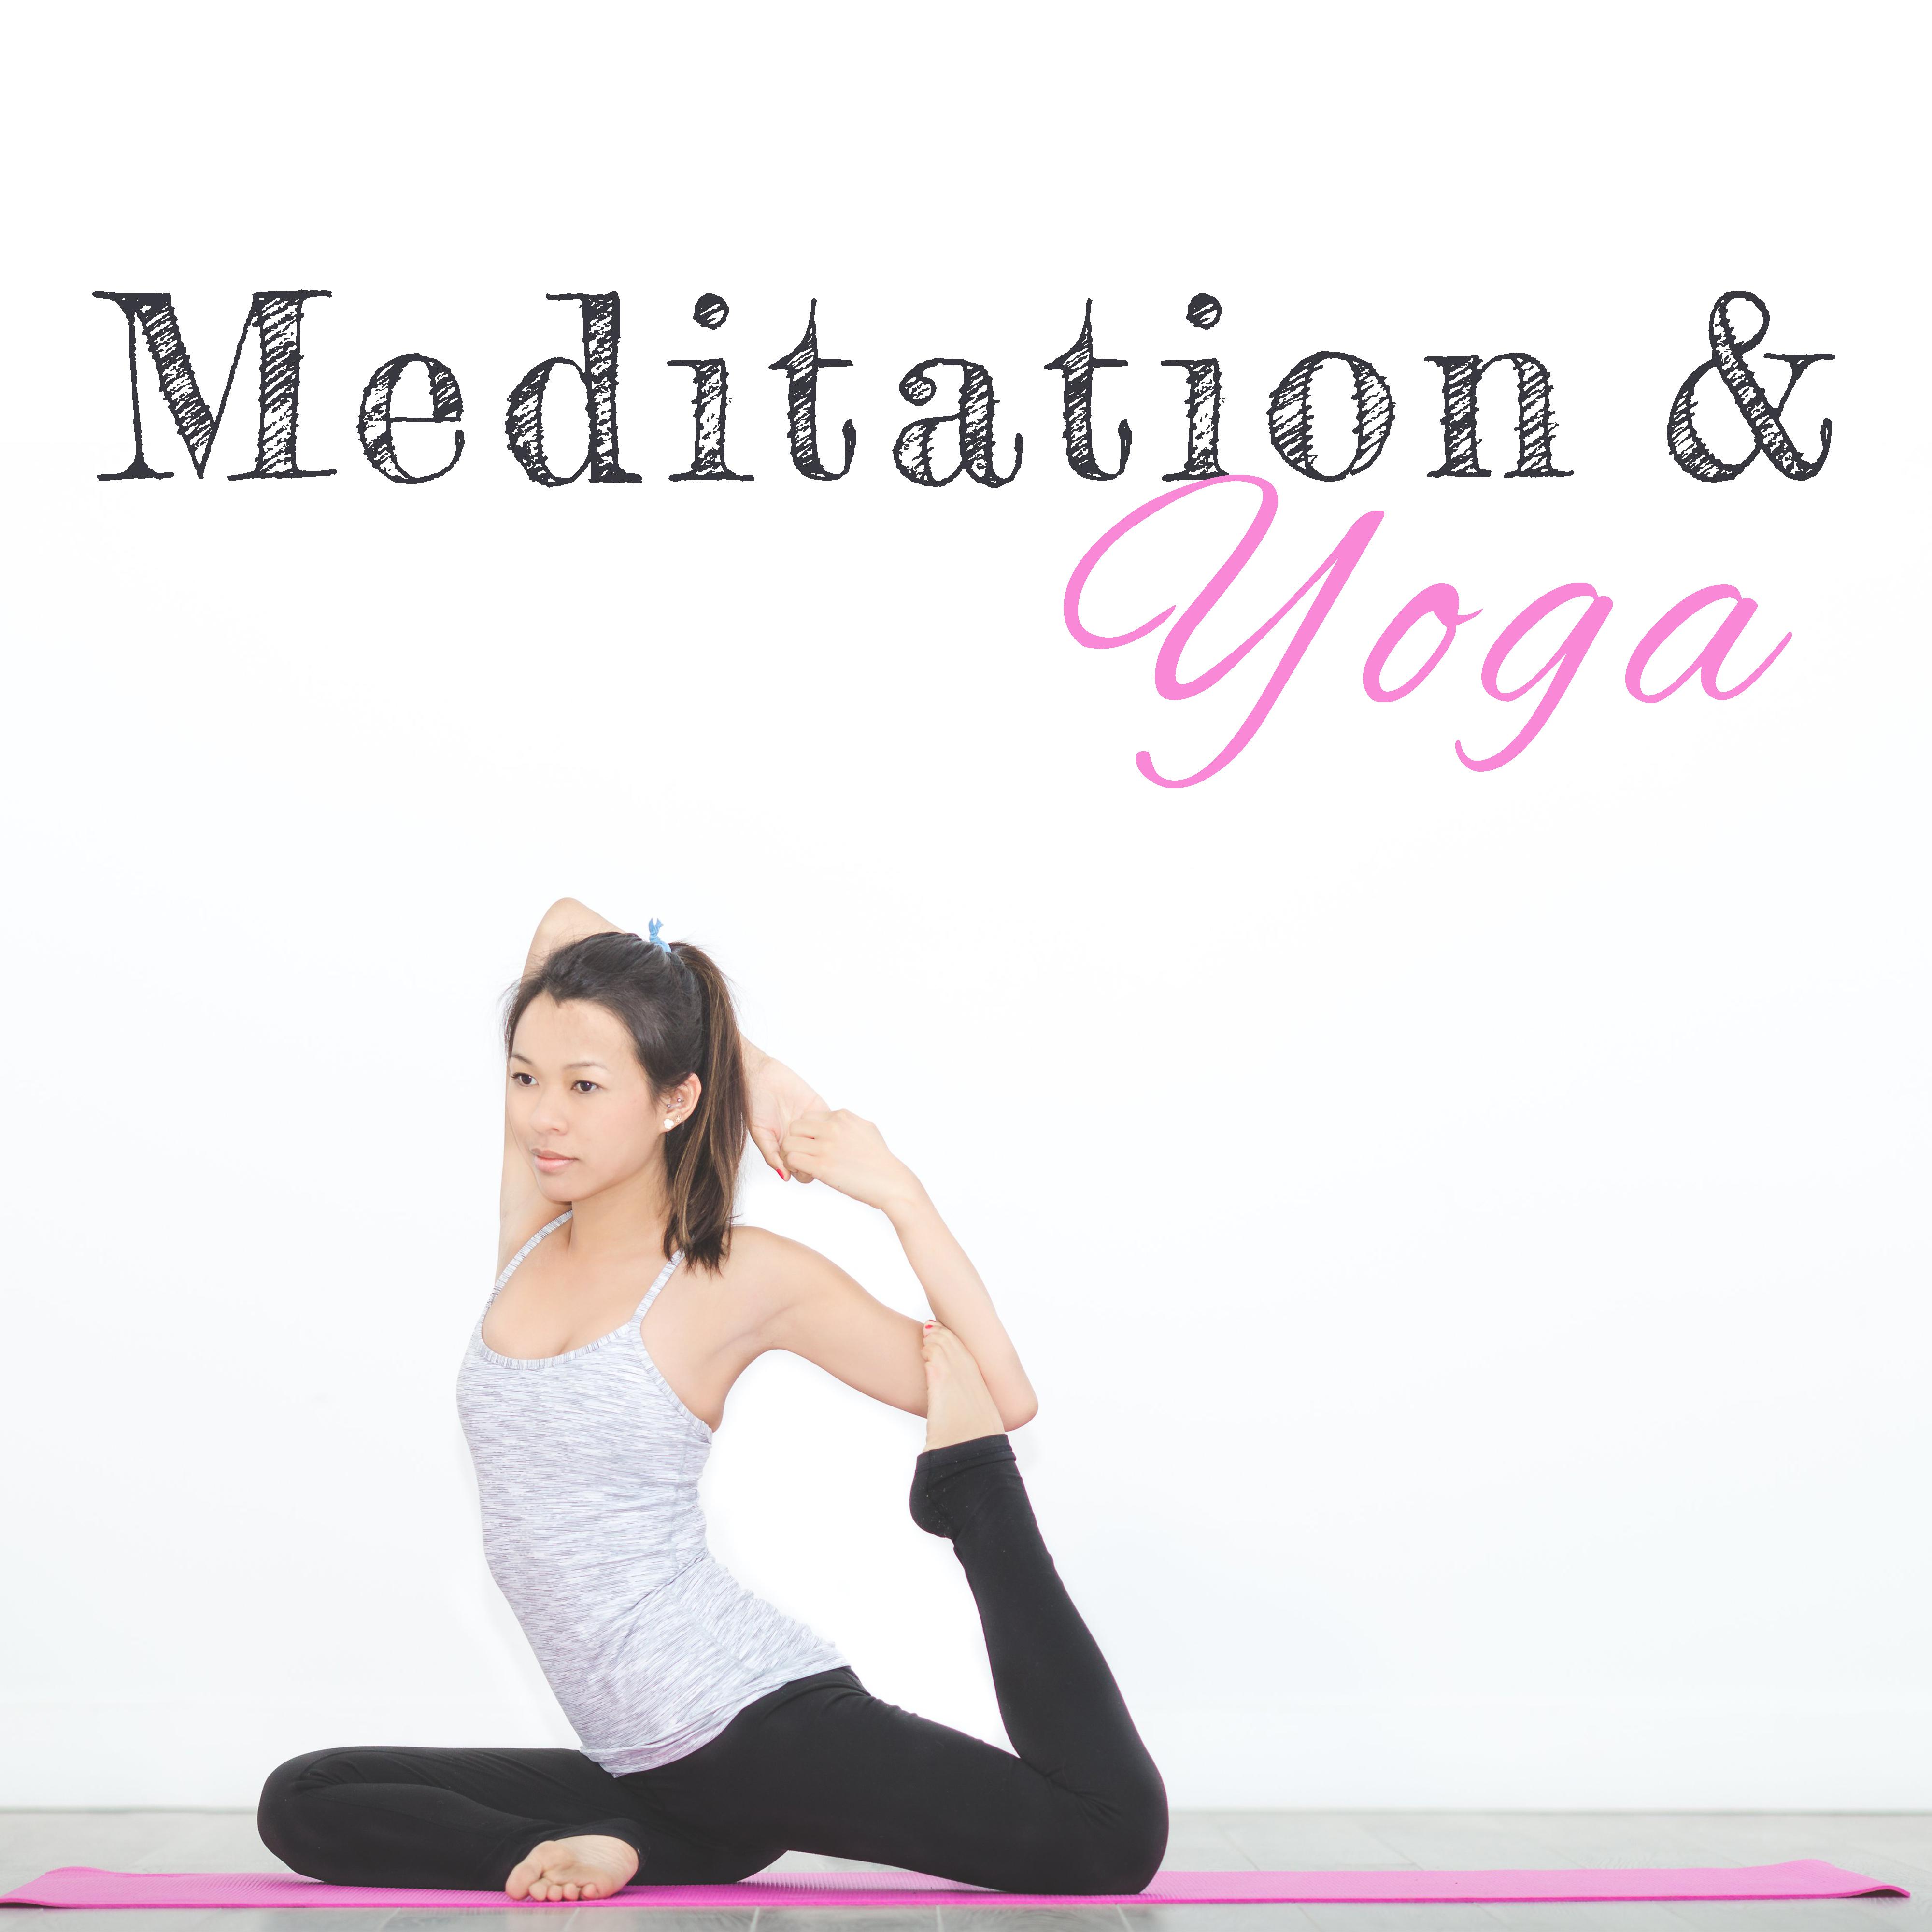 Meditation & Yoga – Soft Sounds to Calm Down, Soothing Mantra, Hatha Yoga, Chakra Balancing, Nature Sounds for Relaxation